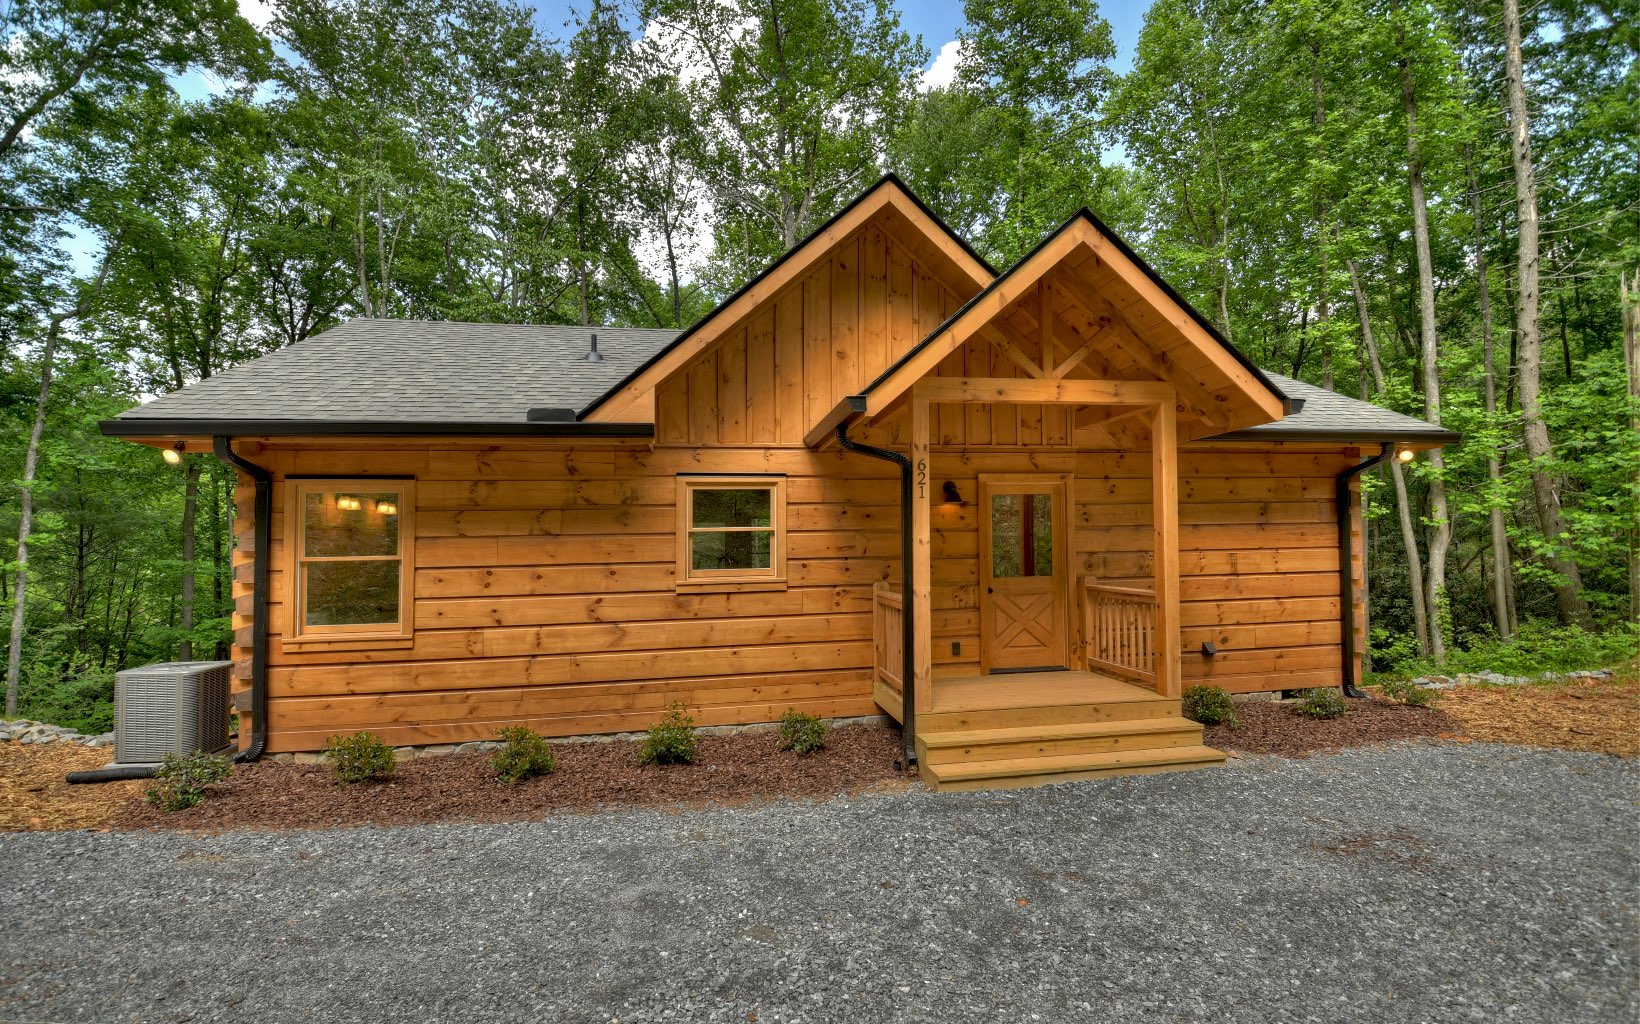 New log cabin sitting on Bucktown Creek with beautiful creek sounds. Popular 2/2 with soaring greenroom and corner rock fireplace with gas logs open to kitchen with custom cabinets. Wood floors throughout. Porch goes all the way across the back with plenty of space to enjoy the beautiful foliage and creek sounds.